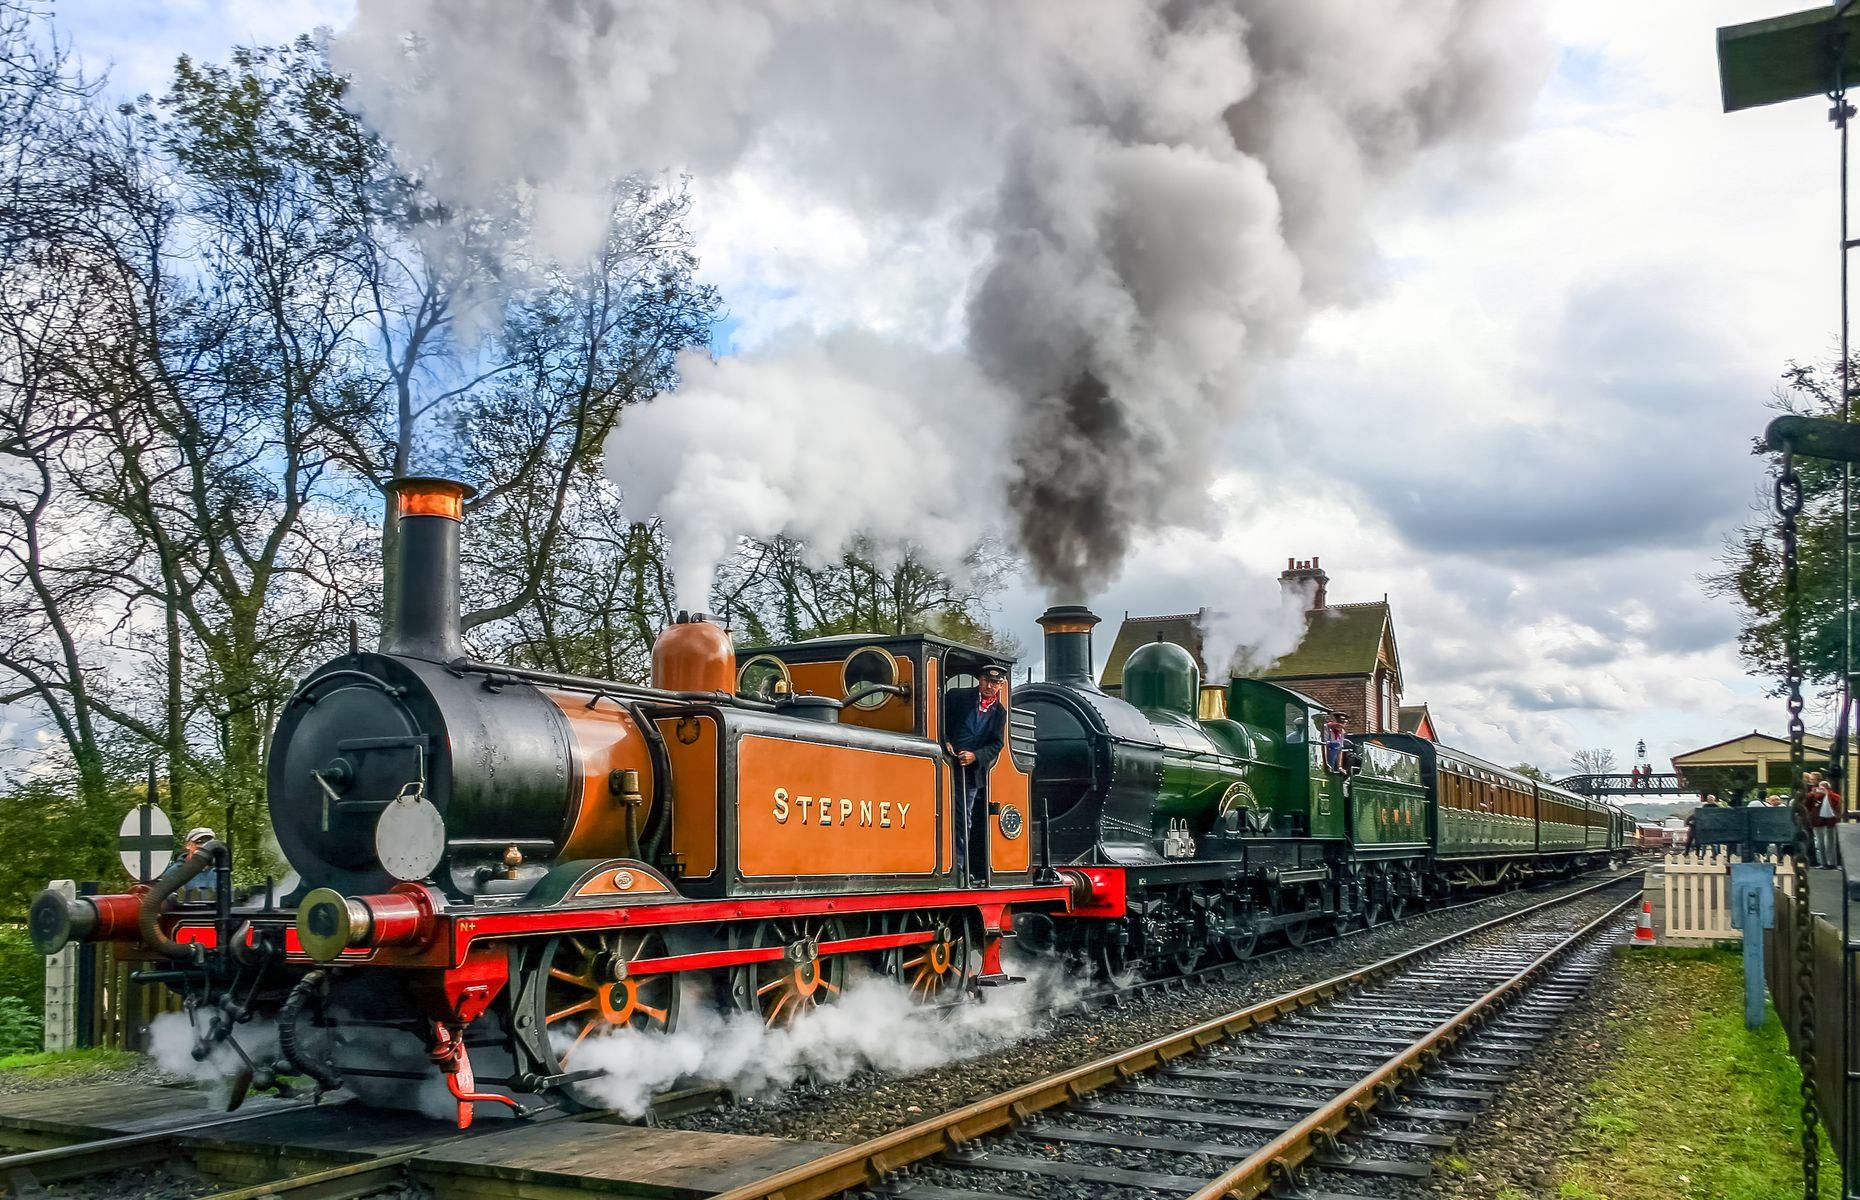 <p>There’s something magical about a journey on a steam train no matter how old you are, and kids who’ve seen <em>Thomas the Tank Engine</em> or <em>Paddington 2</em> will love this adorable attraction even more. The <a href="https://www.bluebell-railway.com/">Bluebell Railway</a> is Britain’s oldest standard gauge railway, opened in 1882. Choose to ride on different historic trains as you chug your way across the gorgeous Sussex countryside. There’s also a museum and interactive exhibition that whisks you through the railway's history with a selection of great memorabilia.</p>  <p><a href="https://www.loveexploring.com/galleries/121327/the-worlds-most-luxurious-train-journeys"><strong>These are the world's most luxurious train journeys</strong></a></p>